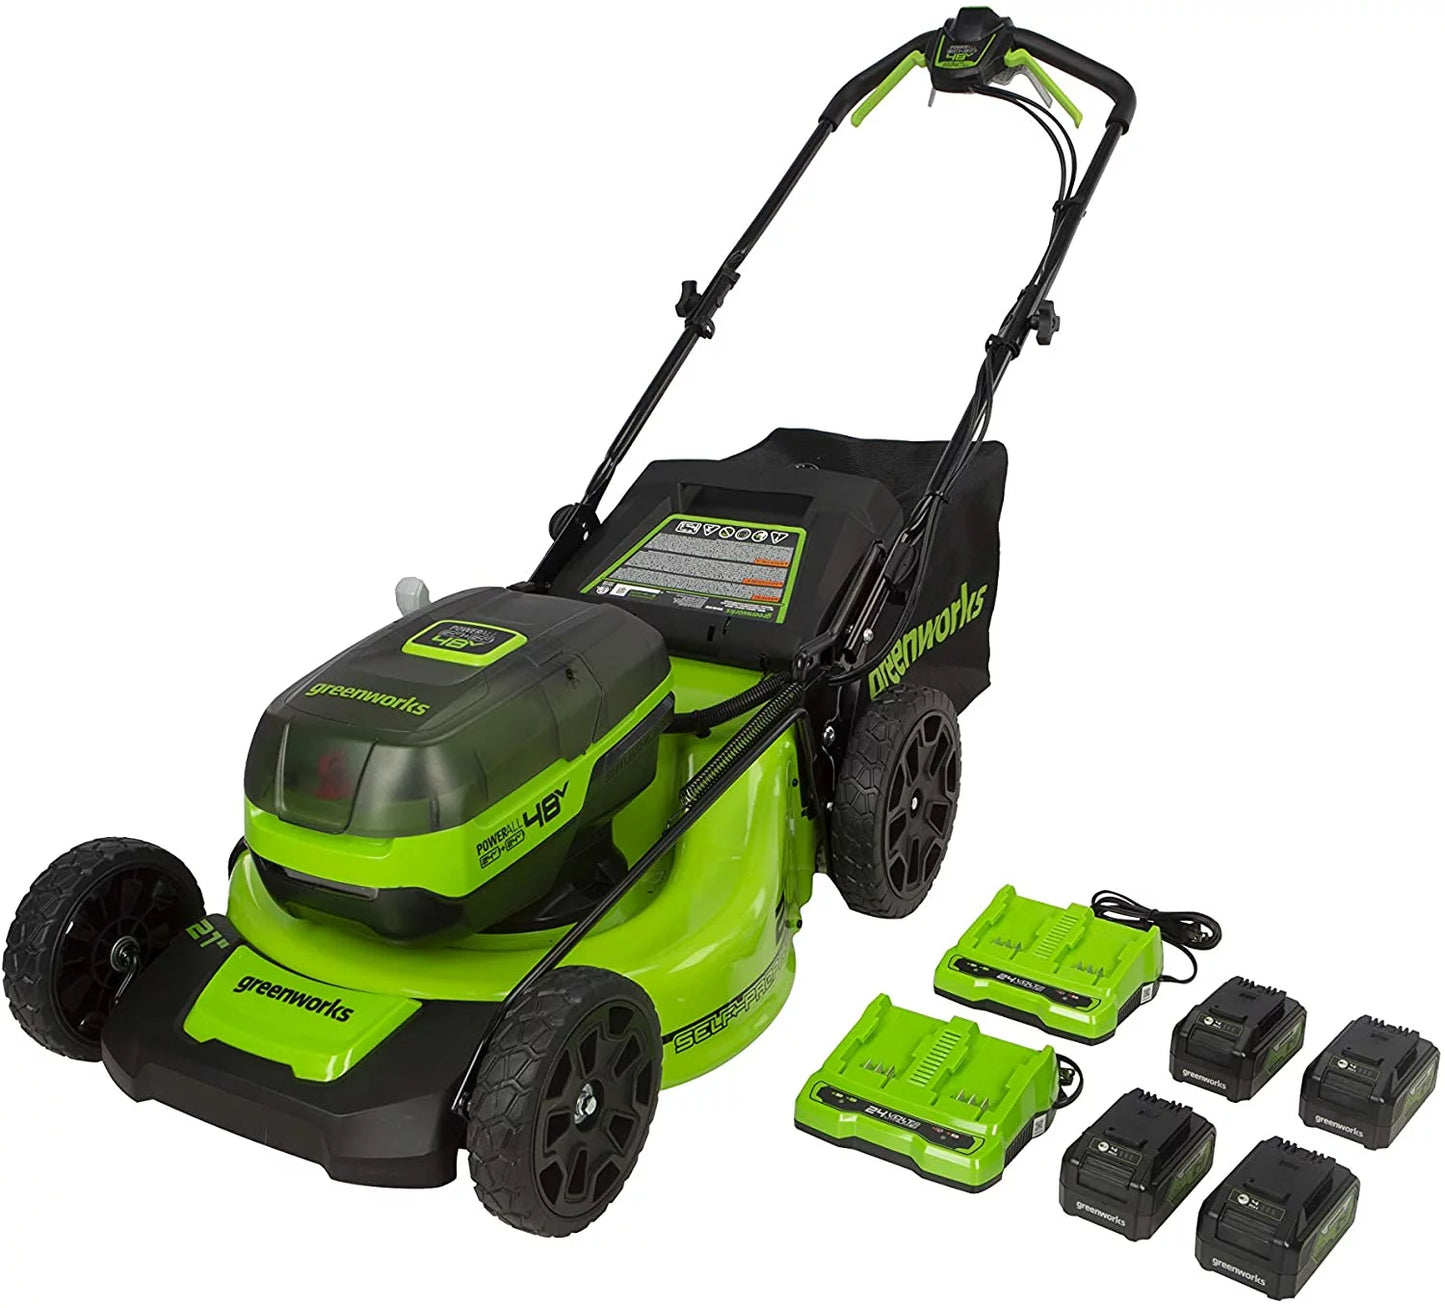 Greenworks 48V 21-inch Self-Propelled Lawn Mower W/(4) 4.0 Ah USB Batteries and (2) Dual Port Chargers, 2532702